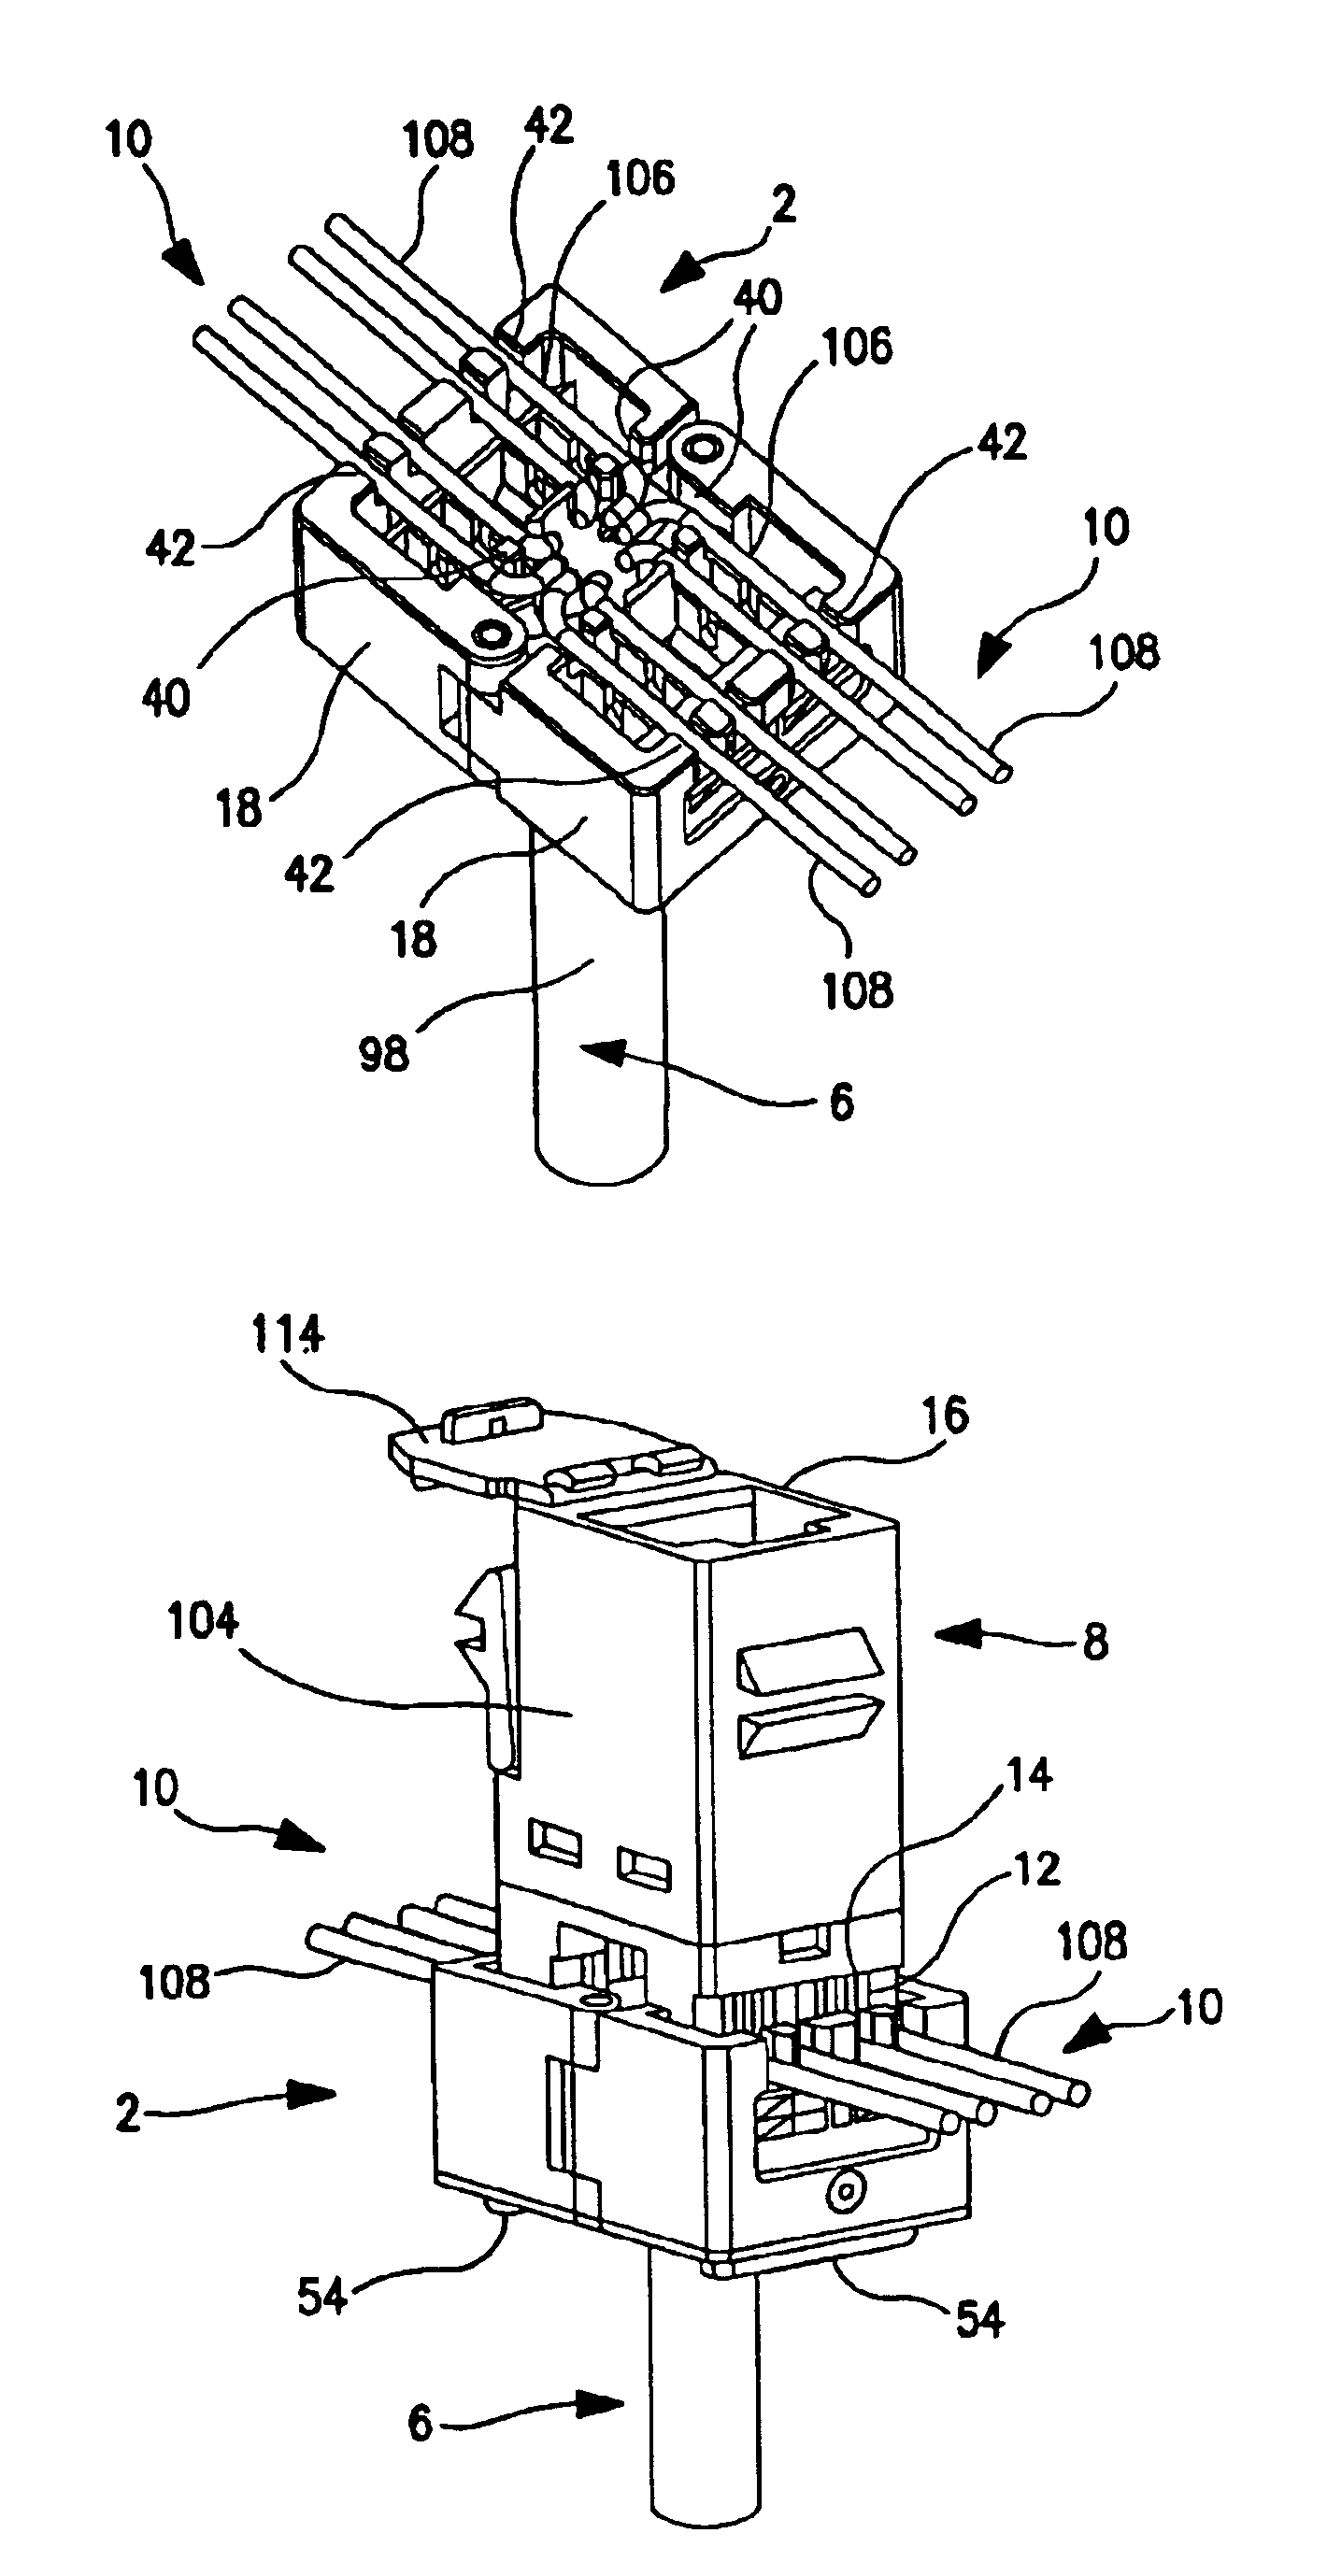 Cable terminating apparatus and method